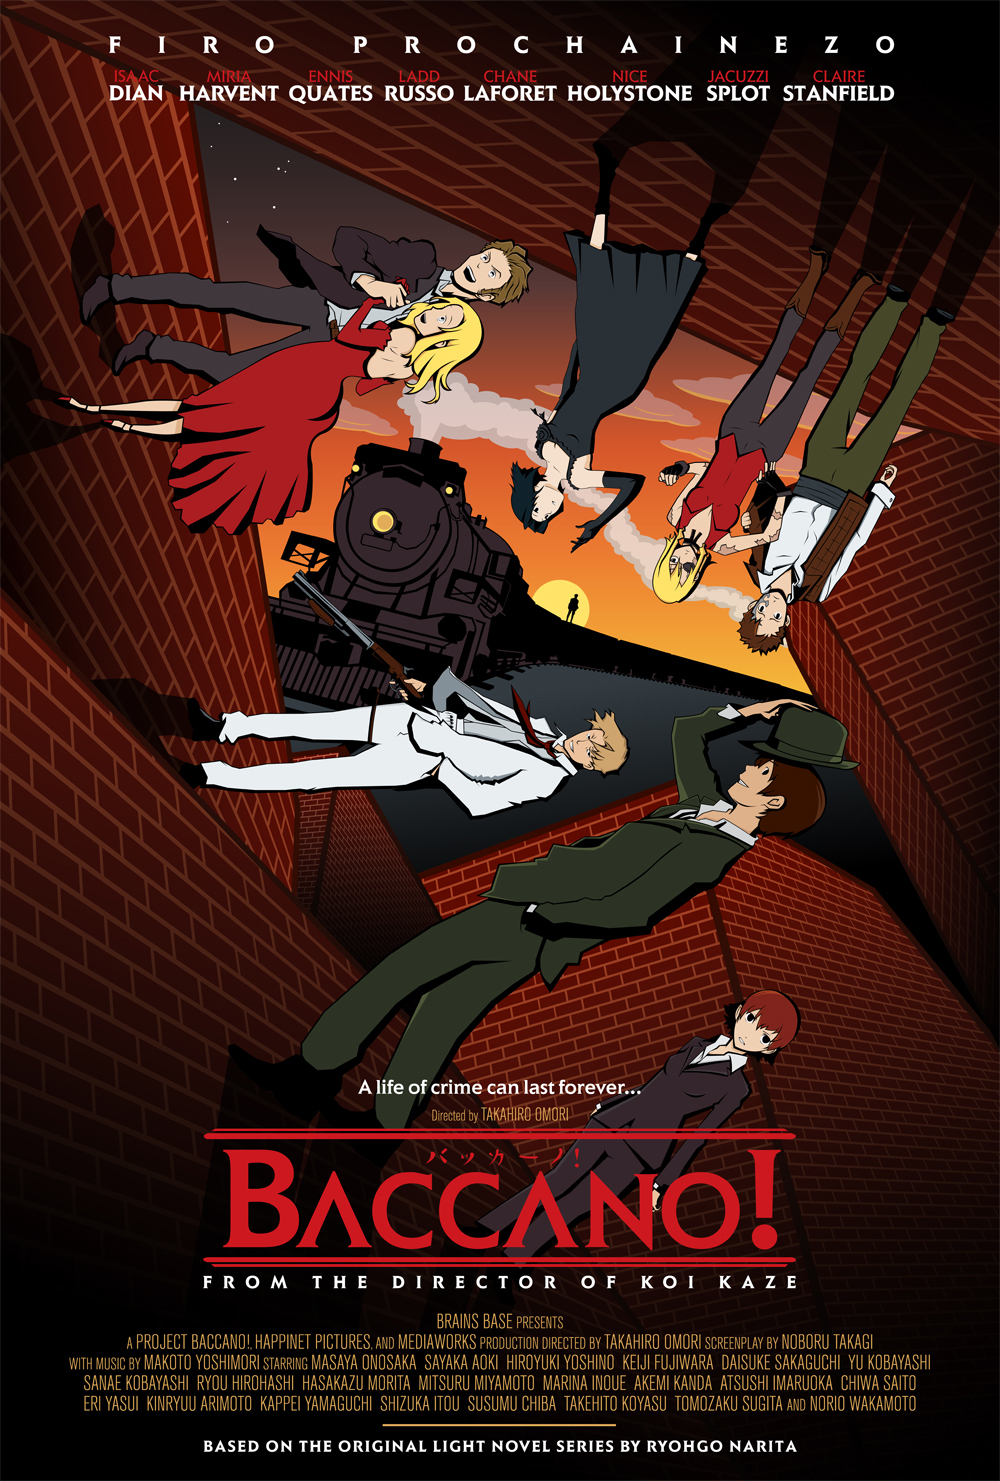 baccano! benhuber black_hair blonde_hair brown_hair chane_laforet claire_stanfield crossover drawfag dress elbow_gloves english ennis eyepatch firo_prochainezo formal gloves gun hat highres homunculus inception isaac_dian jacuzzi_splot ladd_russo long_hair miria_harvent movie_poster nice_holystone parody poster red_hair scar short_hair smile suit sunset tattoo train vest weapon white_suit